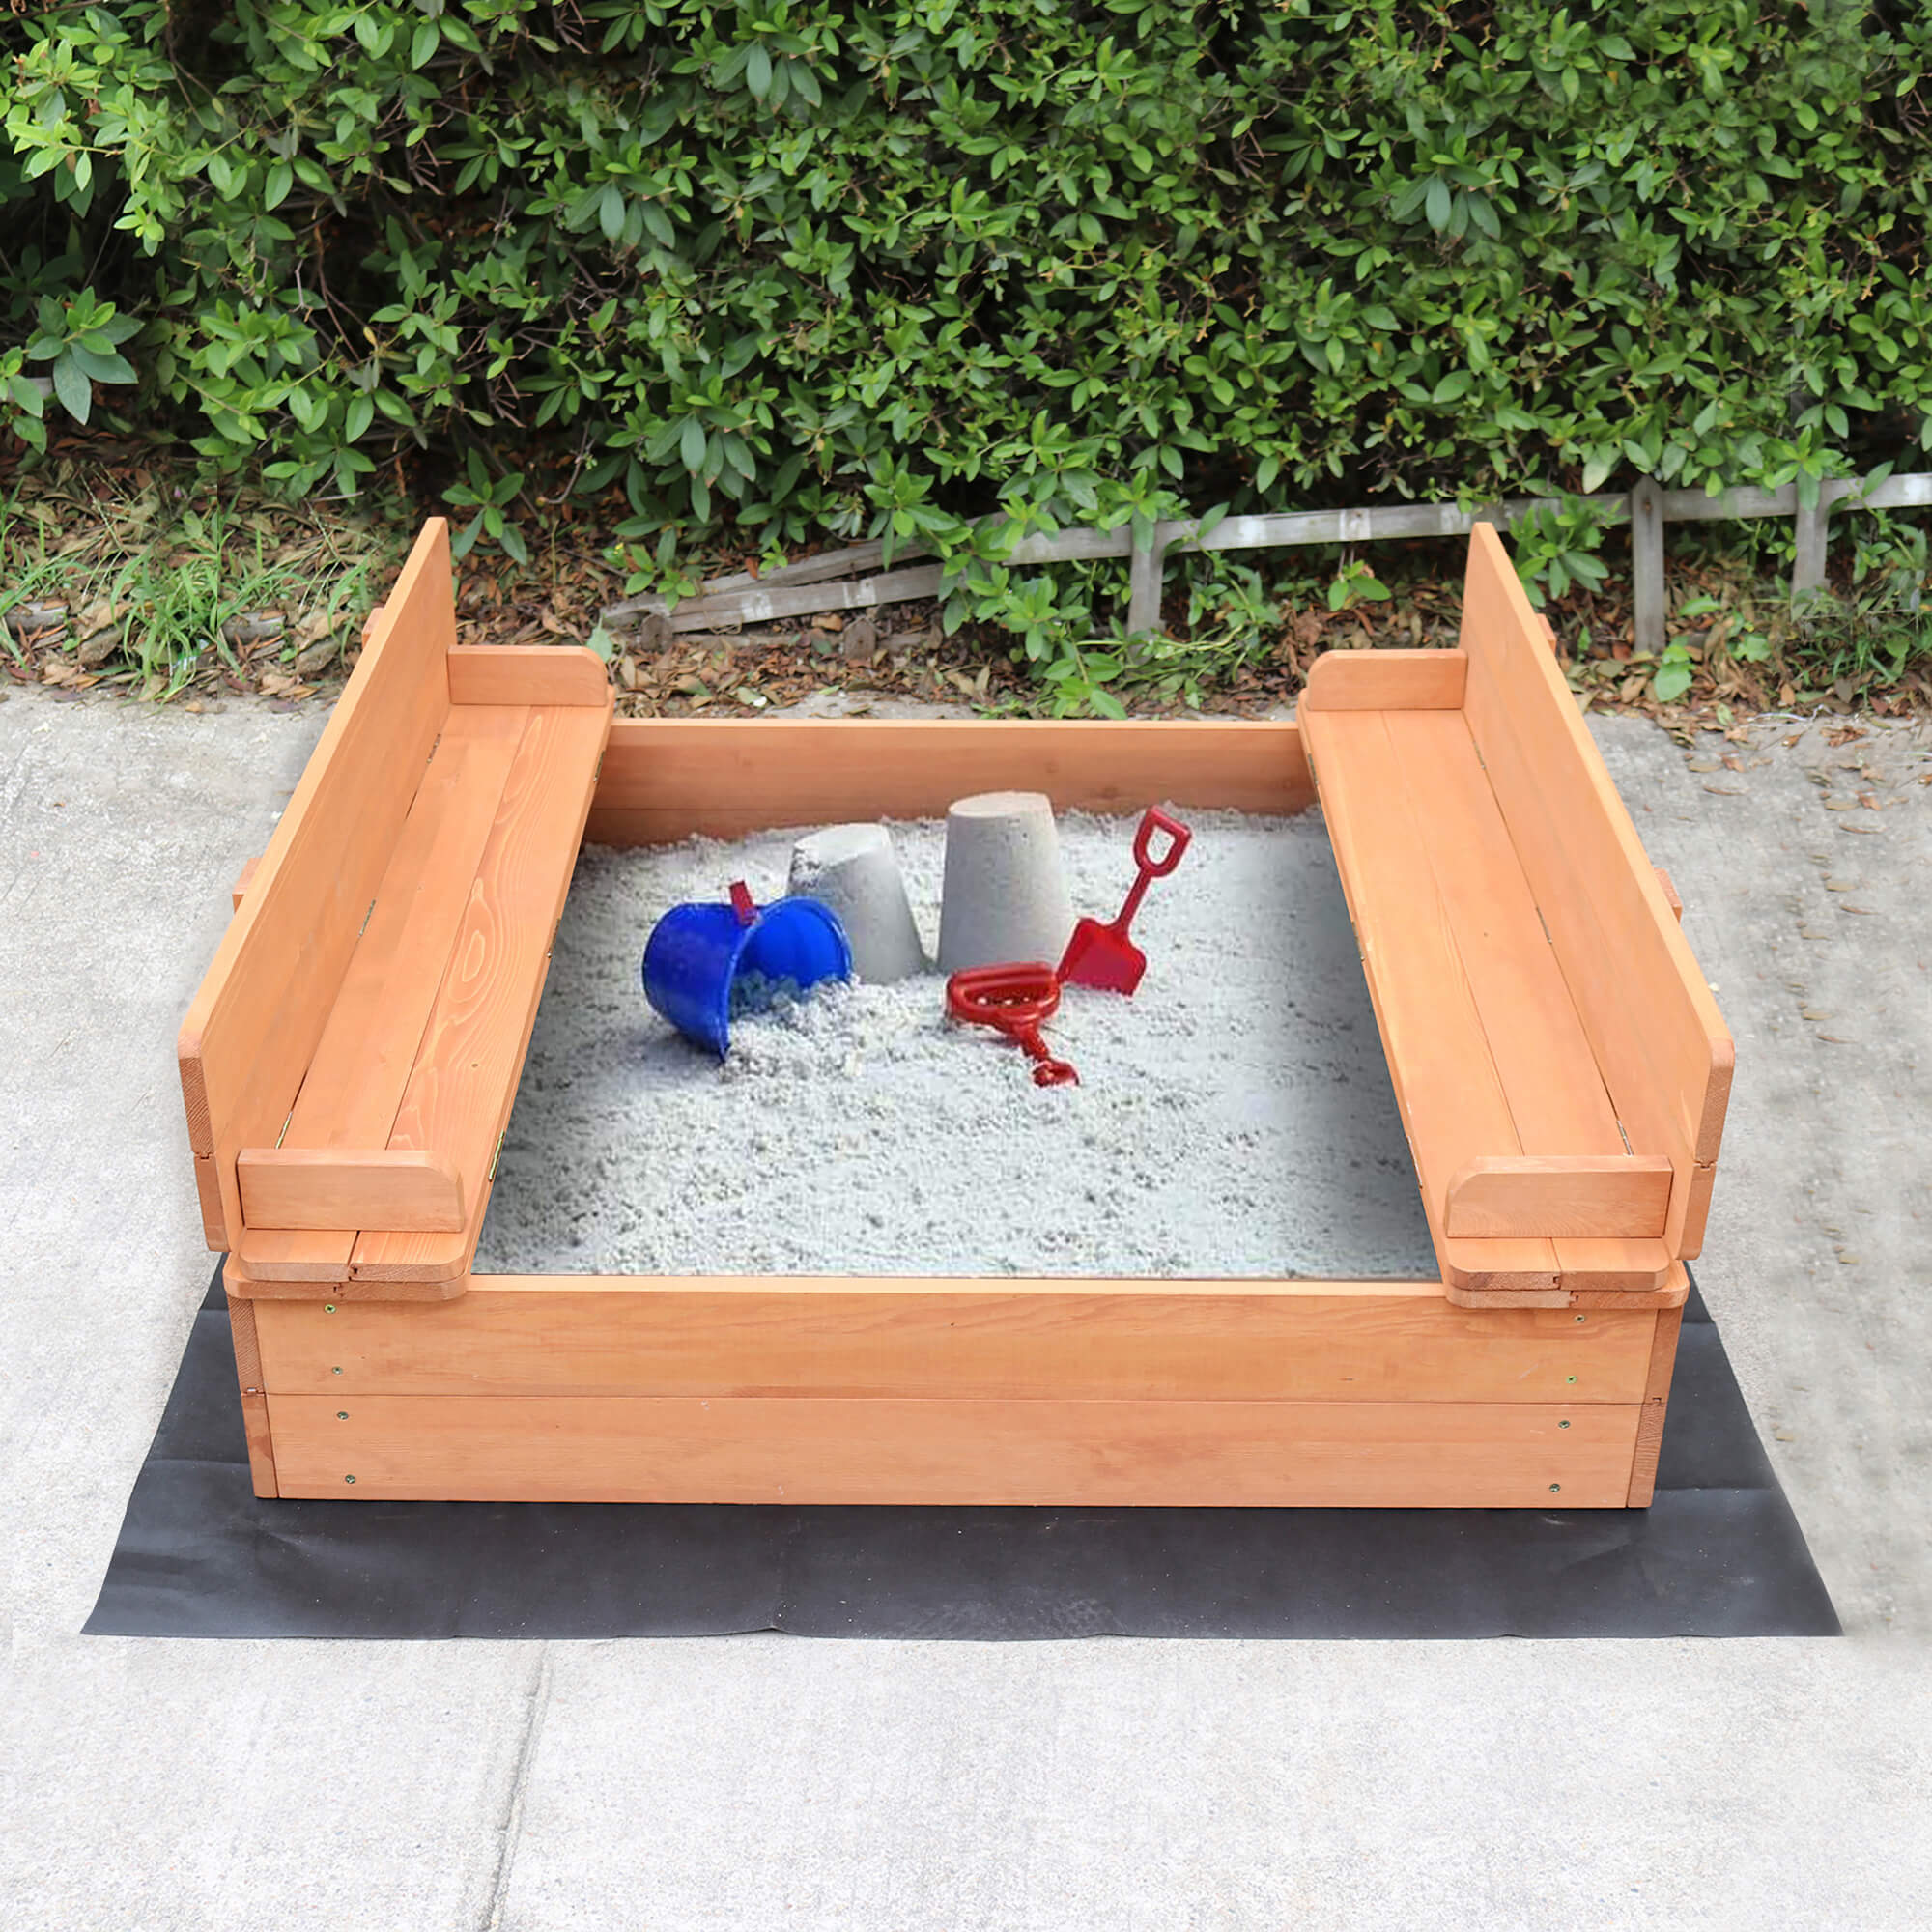 Children's sandpit with seating and cover